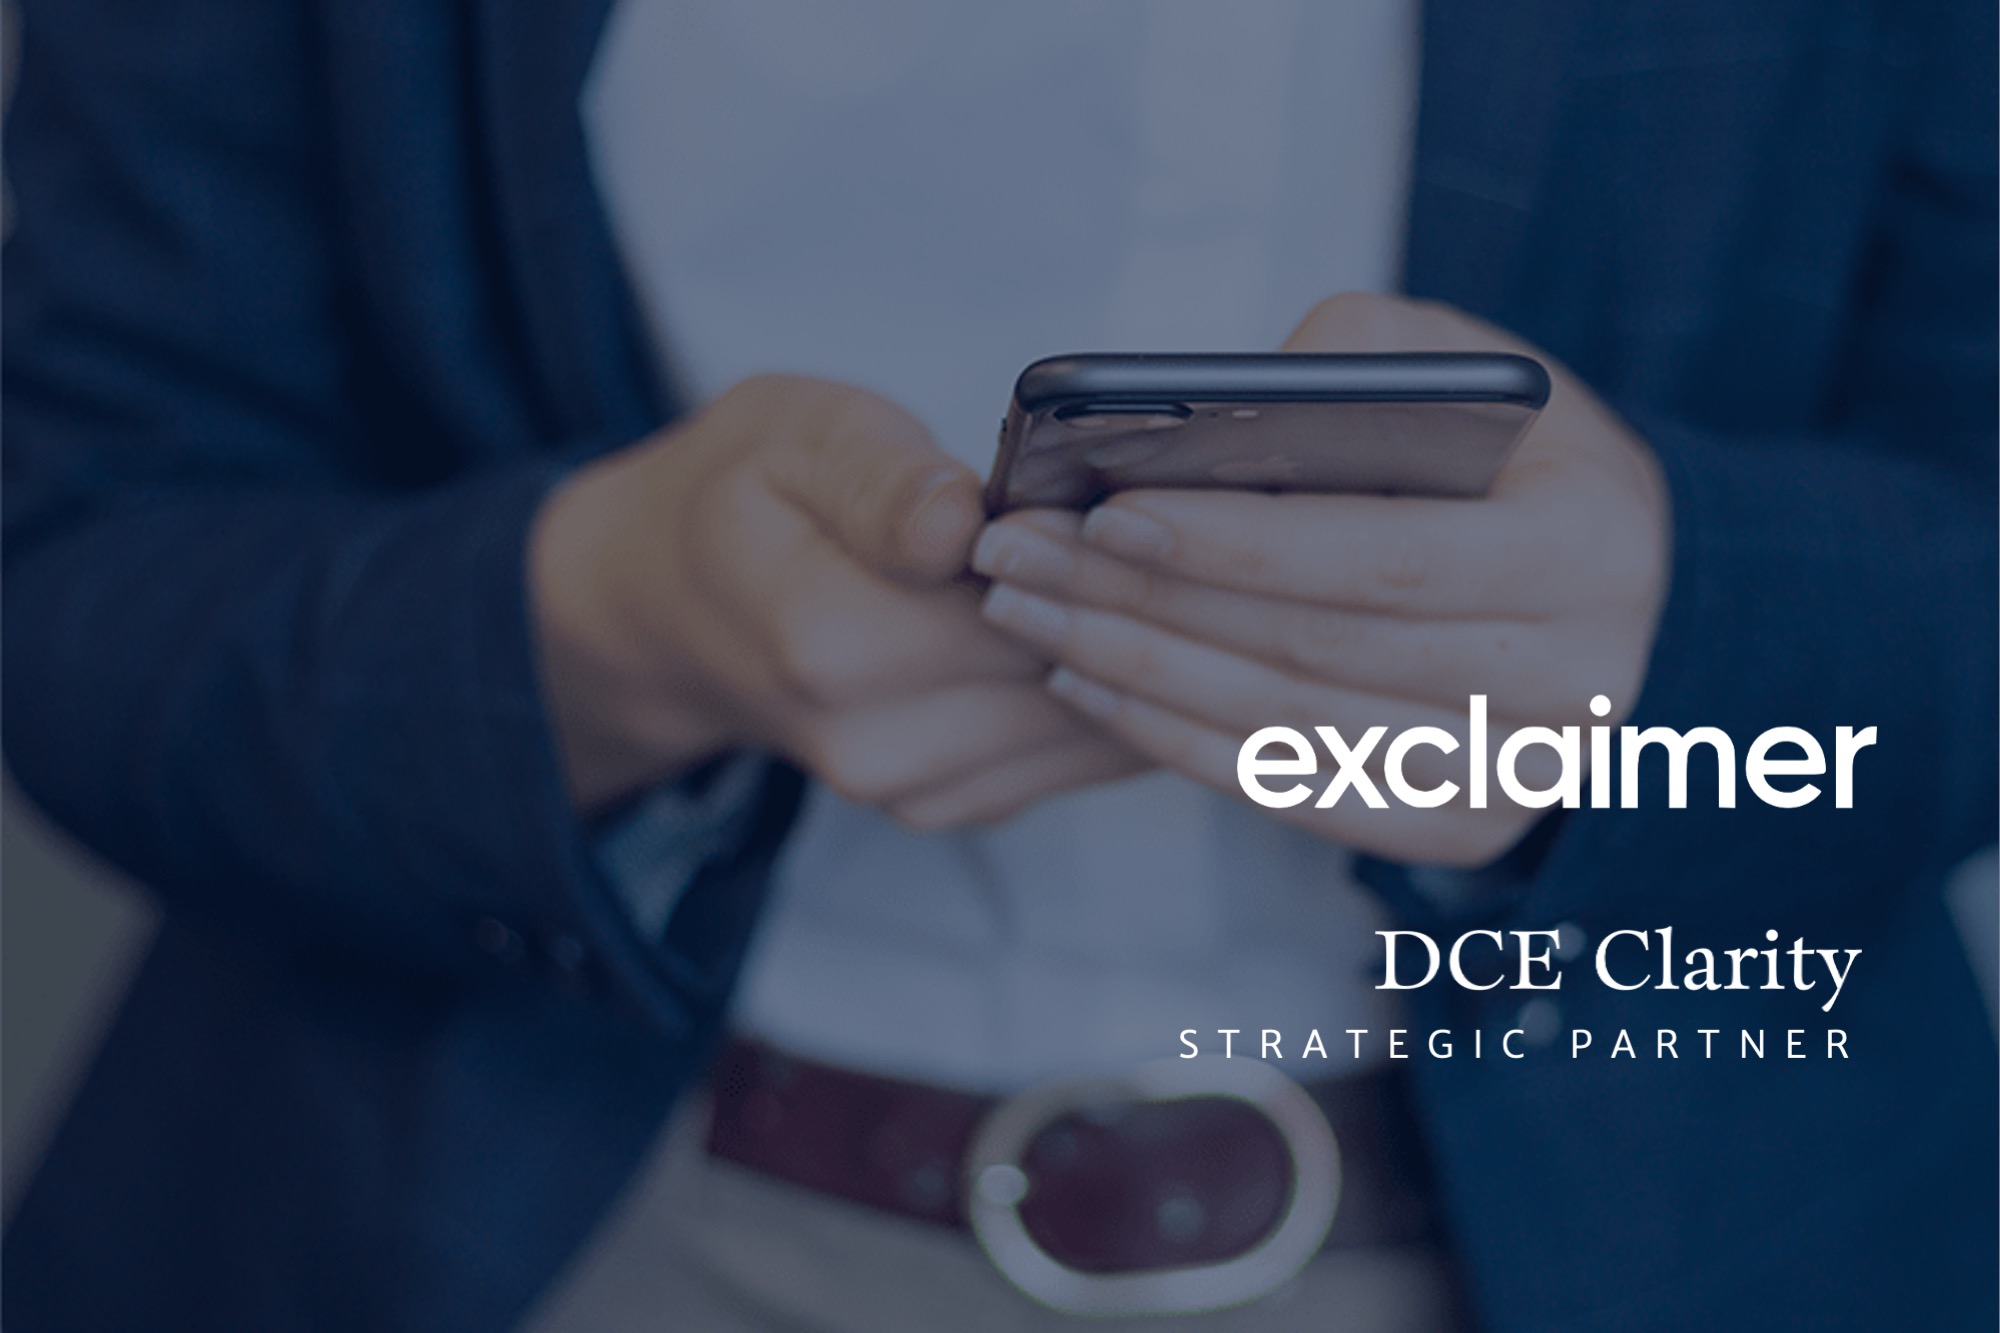 DCE Clarity Partners with Exclaimer